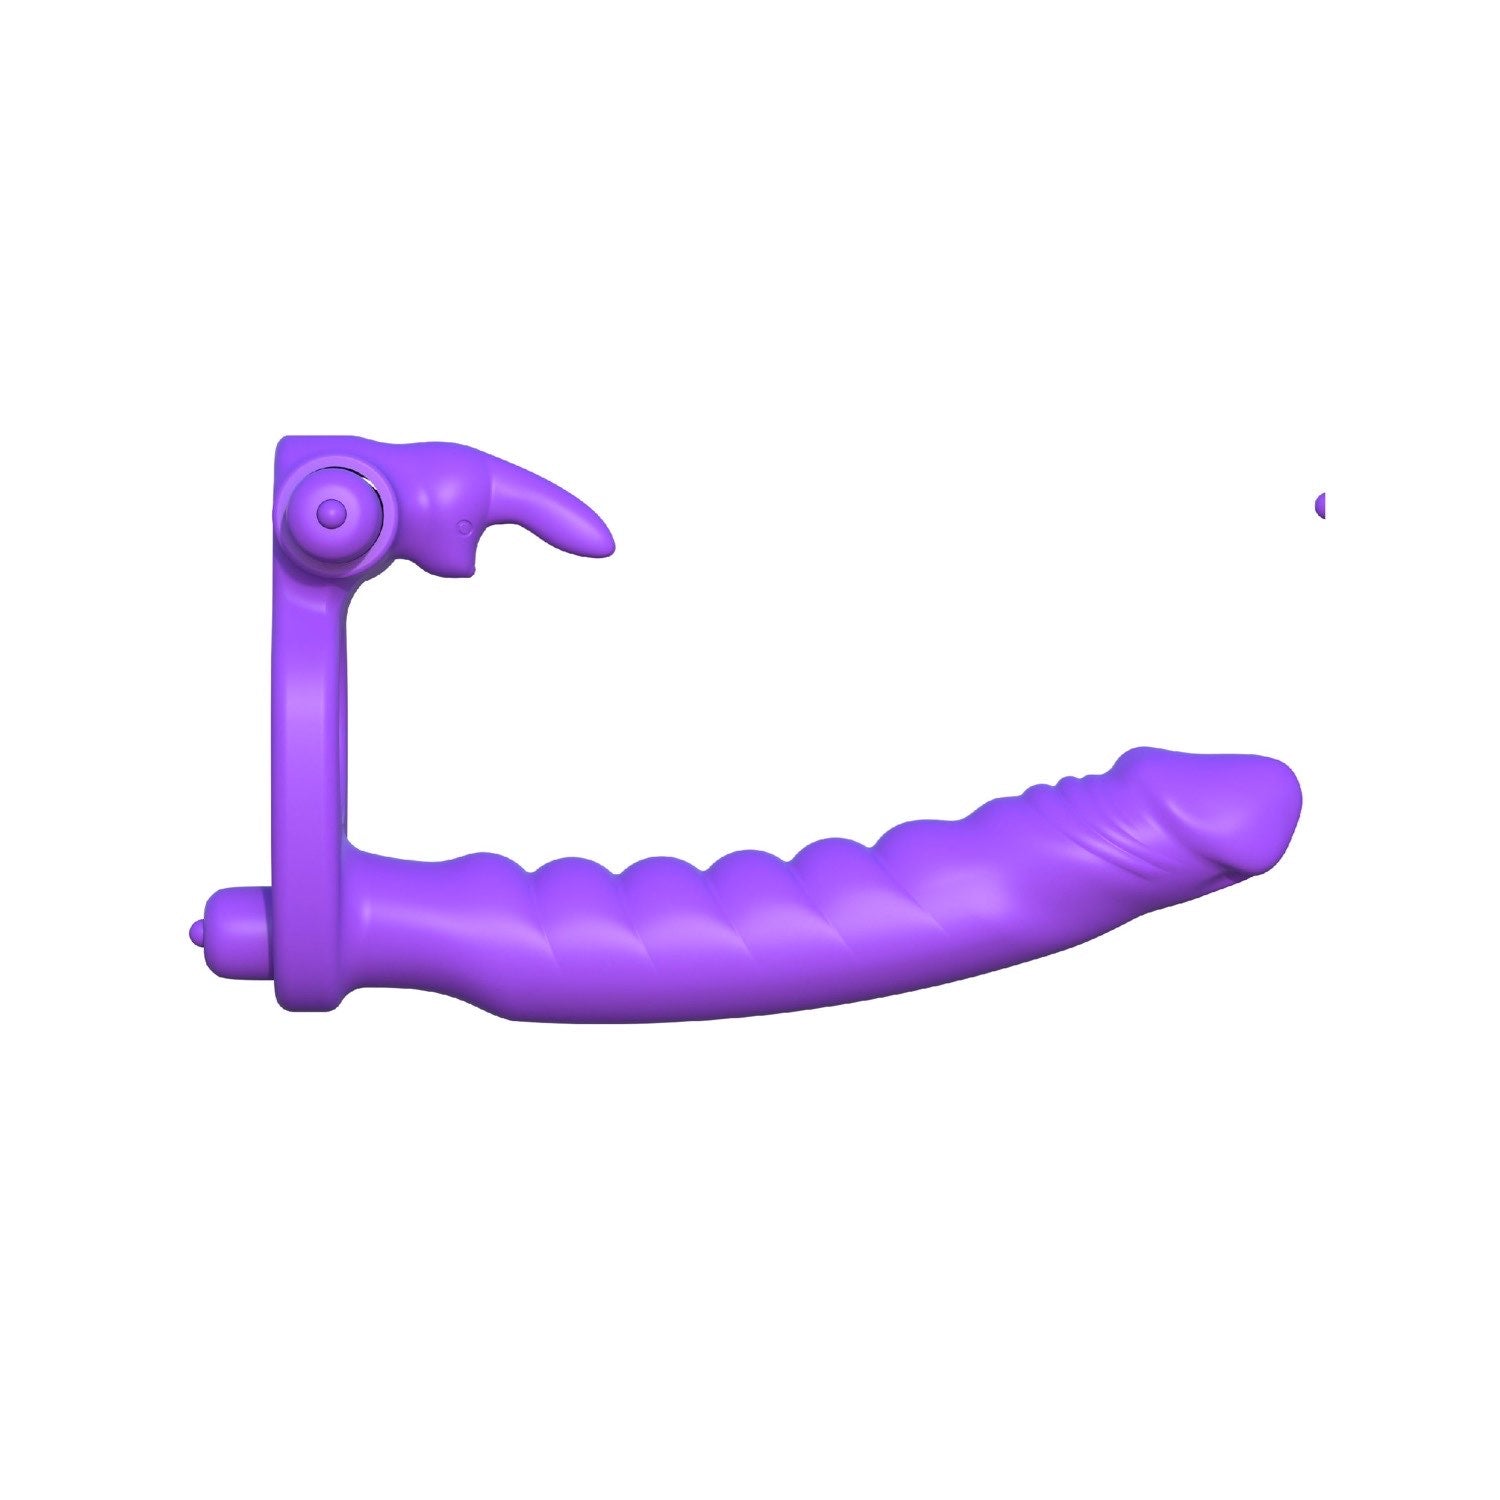 Fantasy C-Ringz Fantasy C-ringz Silicone Double Penetrator Rabbit - Purple Vibrating Cock Ring with Anal Penetrator by Pipedream